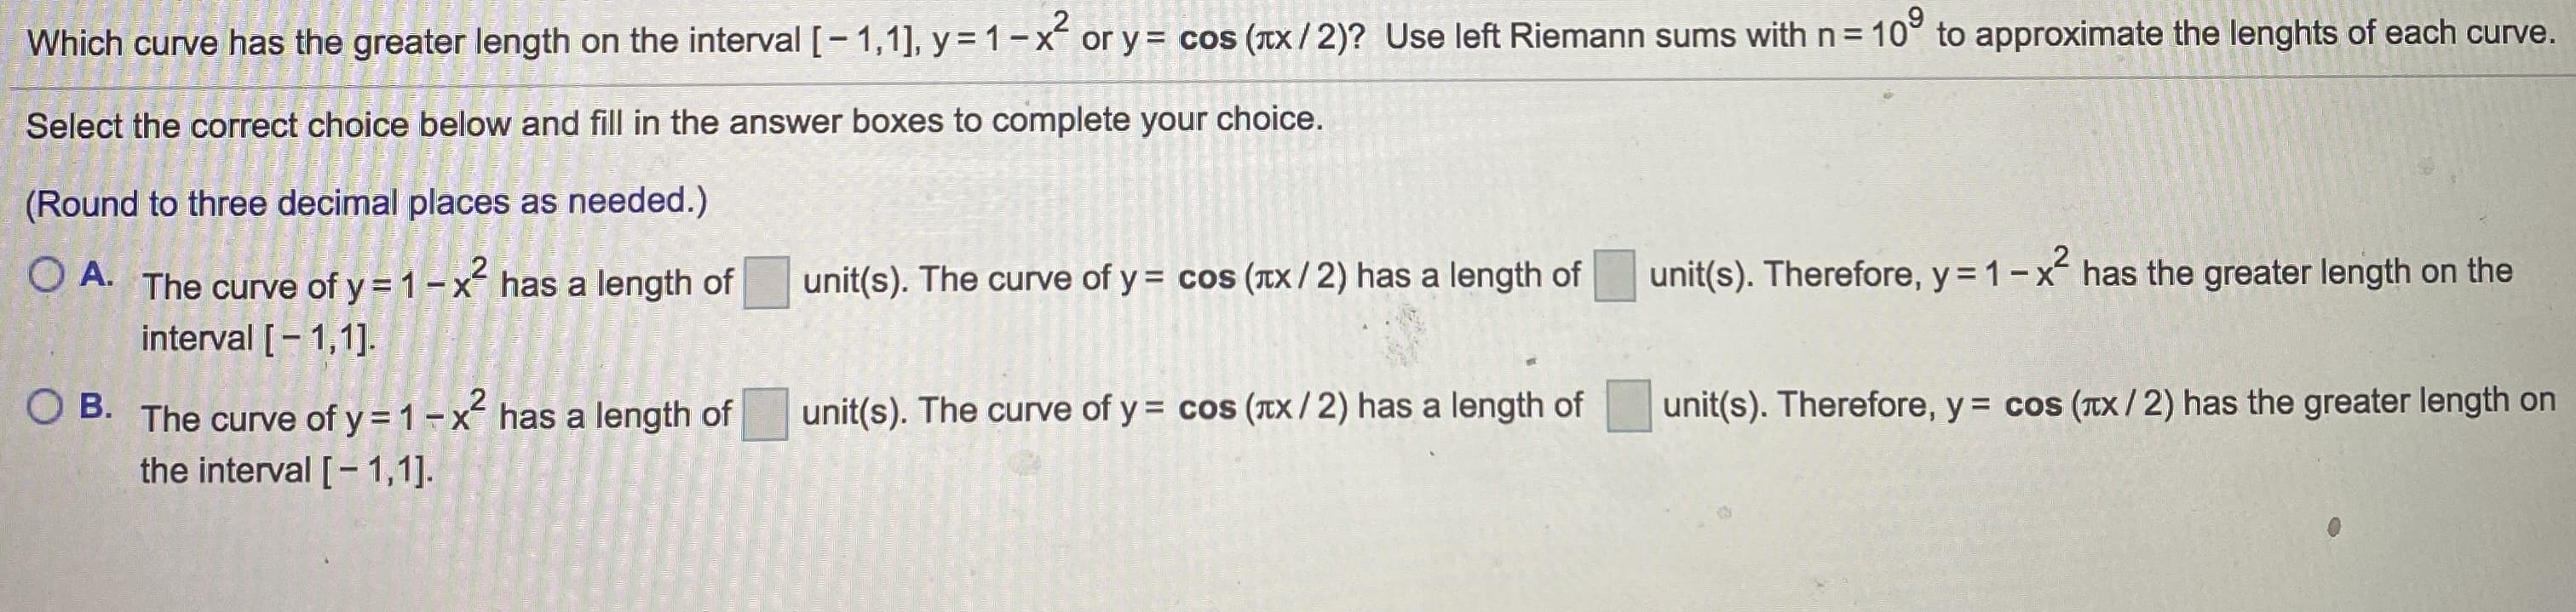 Which curve has the greater length on the interval [- 1,1], y = 1-x or y = cos (Tx/2)? Use left Riemann sums with n = 10° to approximate the lenghts of each curve.
Select the correct choice below and fill in the answer boxes to complete
your
choice.
(Round to three decimal places as needed.)
O A. The curve of y = 1-x has a length of
unit(s). The curve of y = cos (TX / 2) has a length of
unit(s). Therefore, y = 1-x has the greater length on the
interval [- 1,1].
Ов.
O B. has a length of
2
The curve of y=1-x
unit(s). The curve of y = cos (tX / 2) has a length of
unit(s). Therefore, y = cos (TX/2) ha
s the greater length on
the interval [- 1,1].
